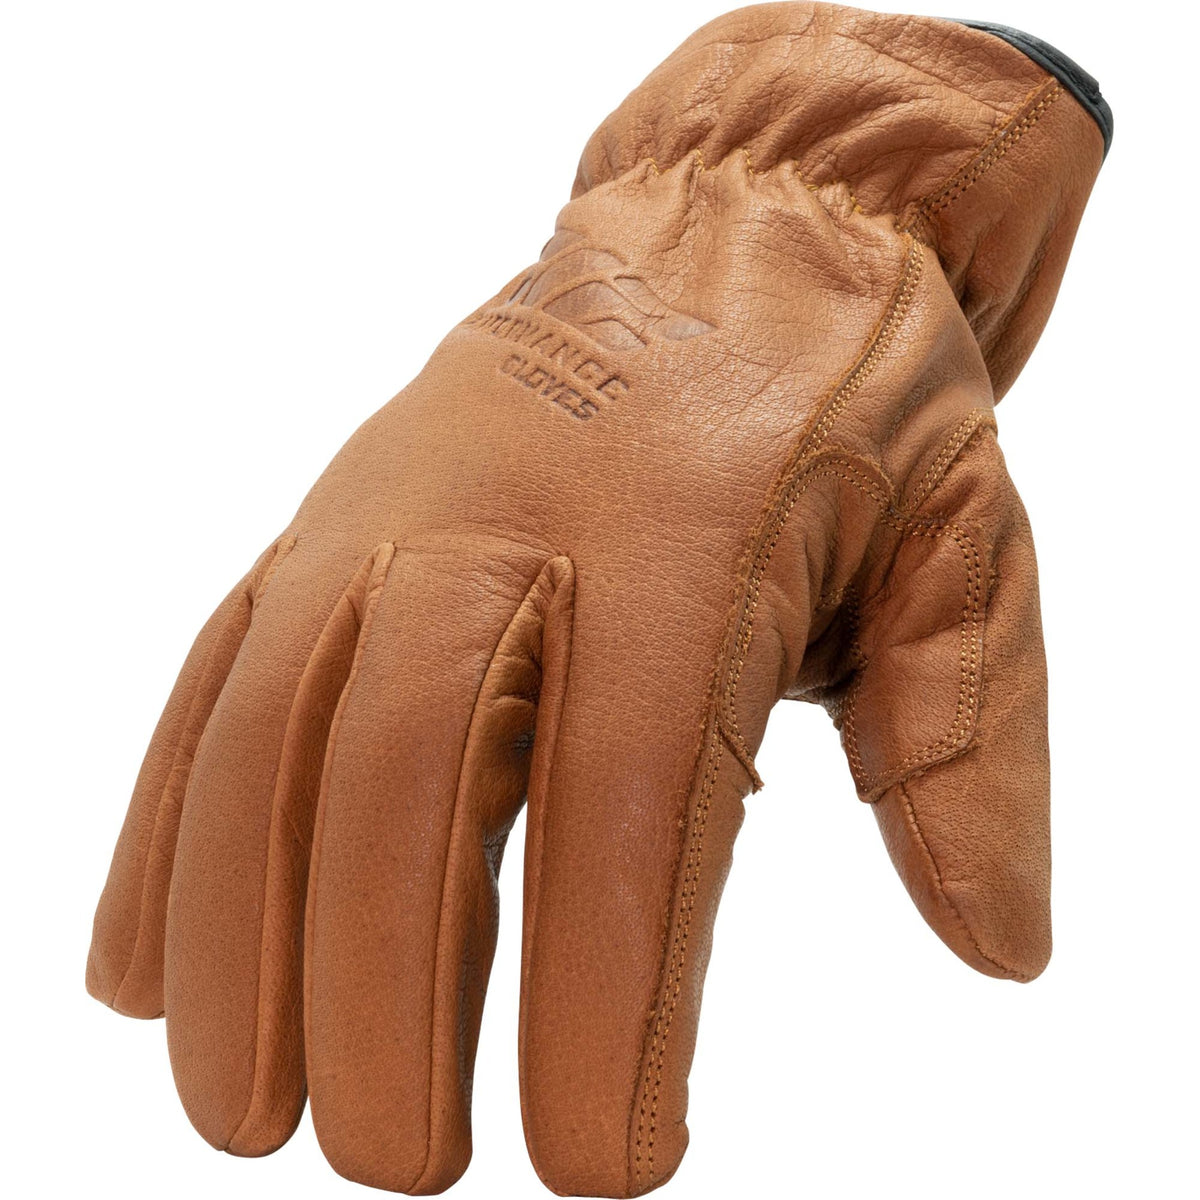 212 Performance TLDWP-0811 Fleece Lined Buffalo Leather Driver Winter Work Glove in Russet Brown, X-Large